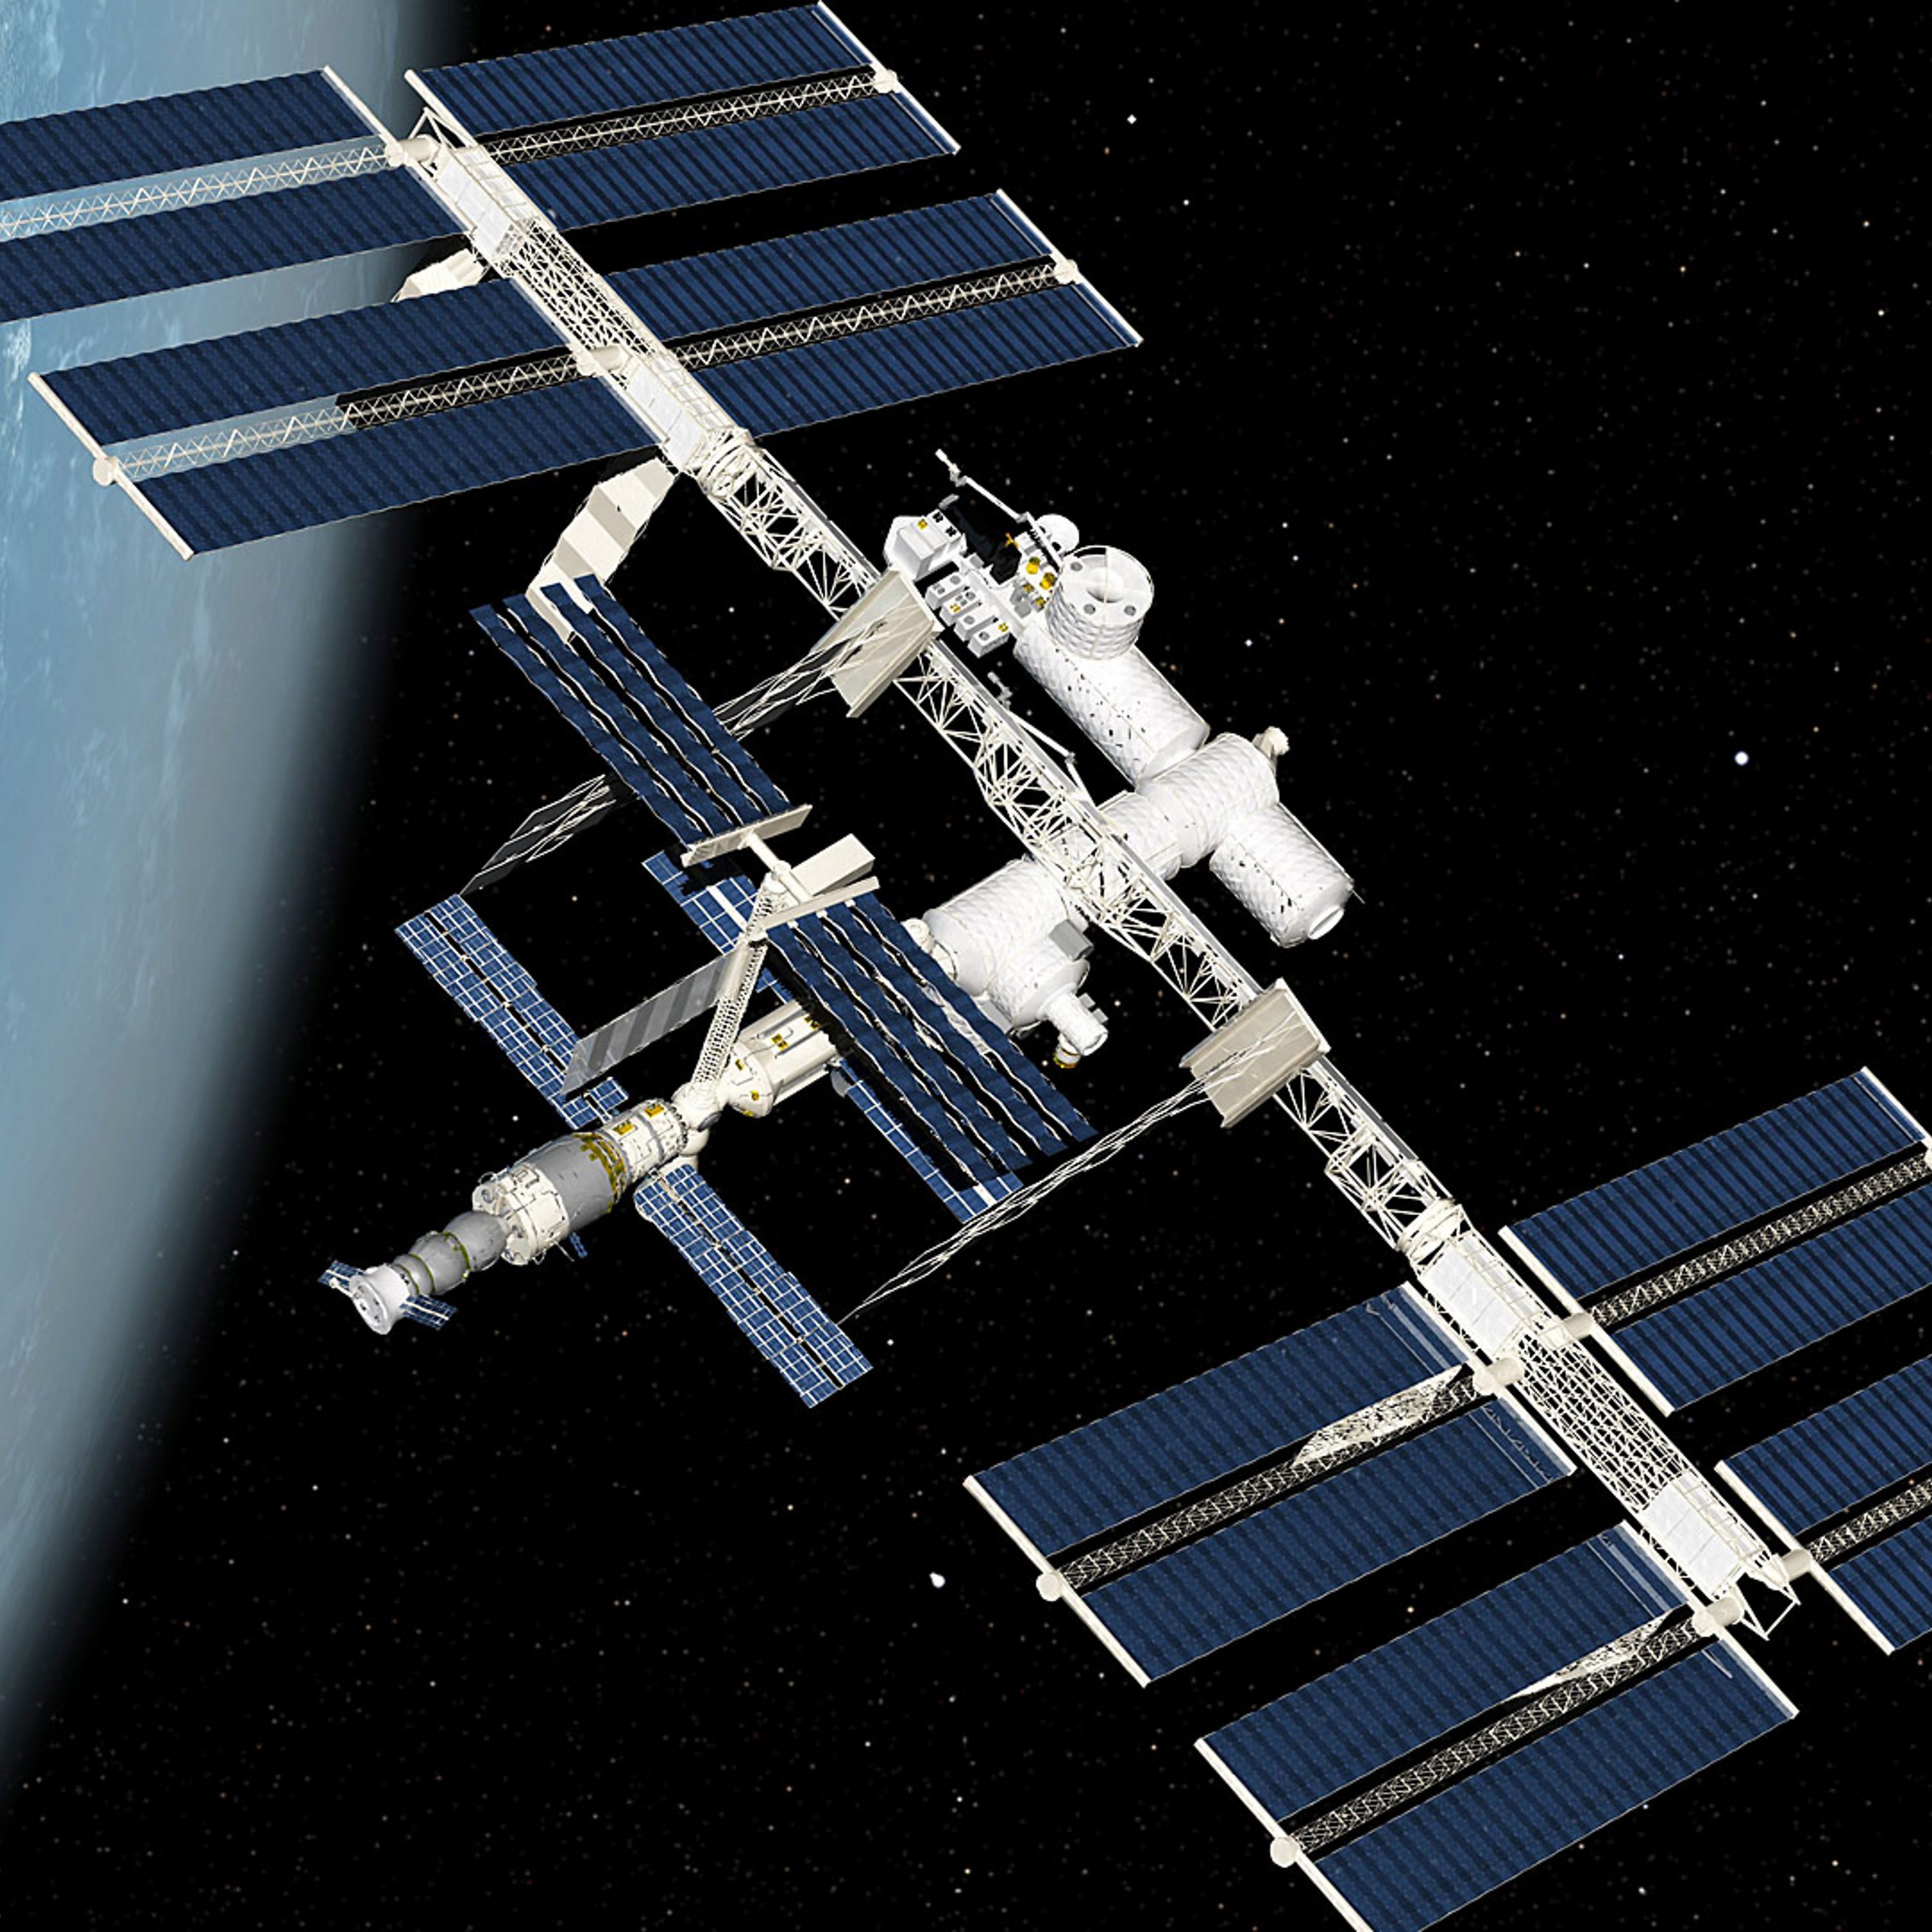 Do we need more space stations?